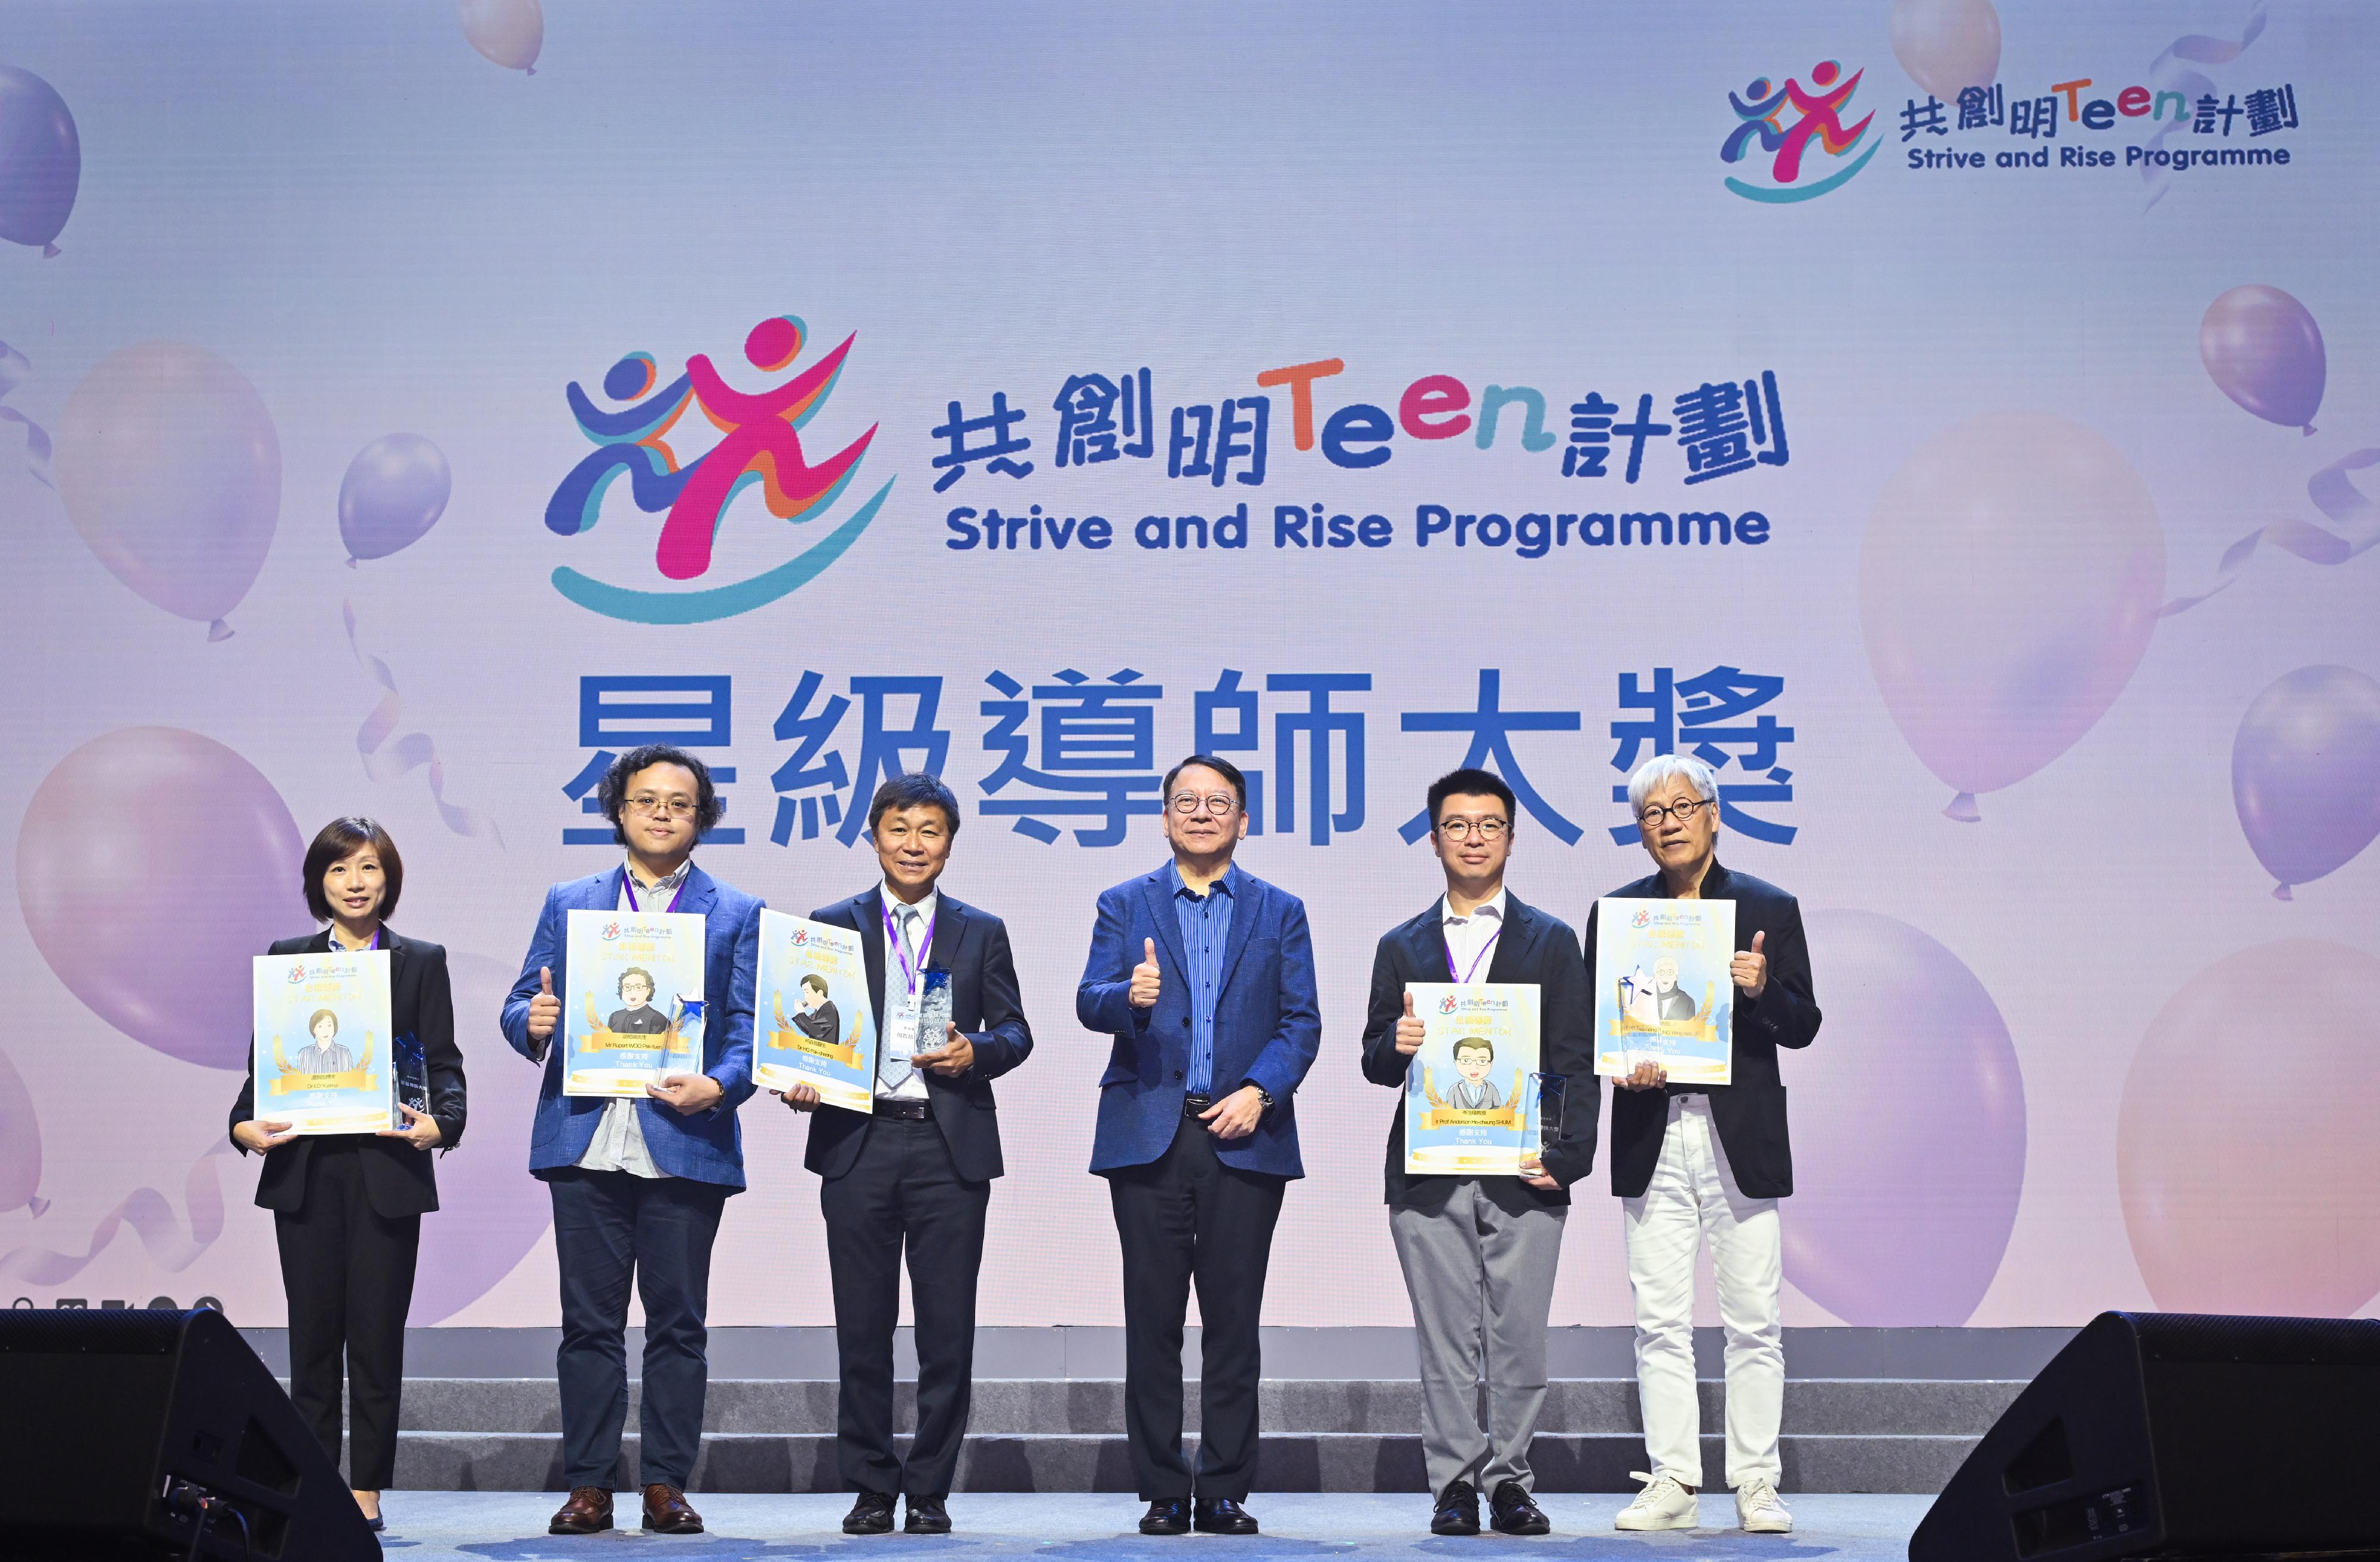 The Chief Secretary for Administration, Mr Chan Kwok-ki, attended the Graduation Ceremony of the Strive and Rise Programme today (November 4). Photo shows Mr Chan (third right) with the star mentors, namely Dr Ho Pak-cheong (third left), Professor Anderson Shum (second right), Mr Rupert Woo (second left), Professor Raymond Fung (first right), and Dr Lo Yuen-yi (first left).
